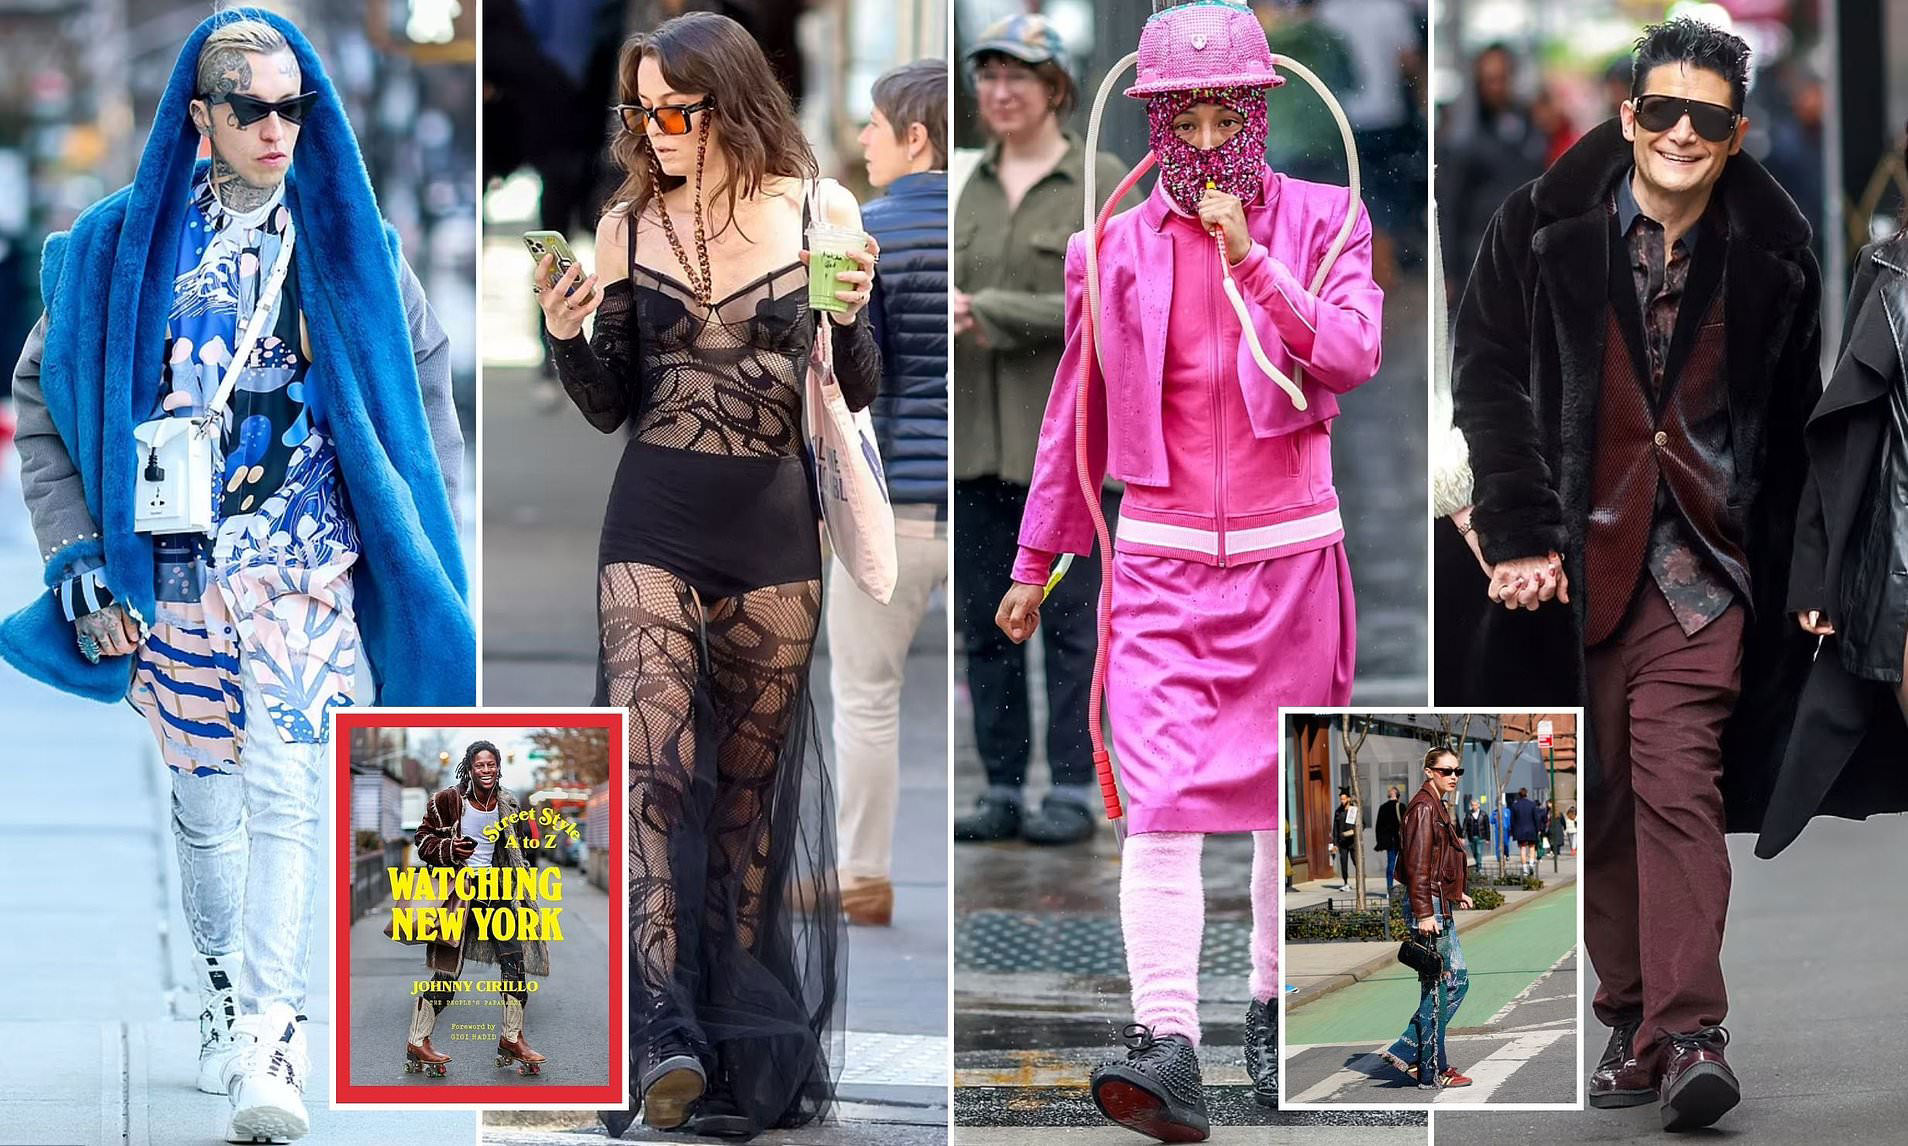 The wildest street fashions that prove NY is still the world's runway